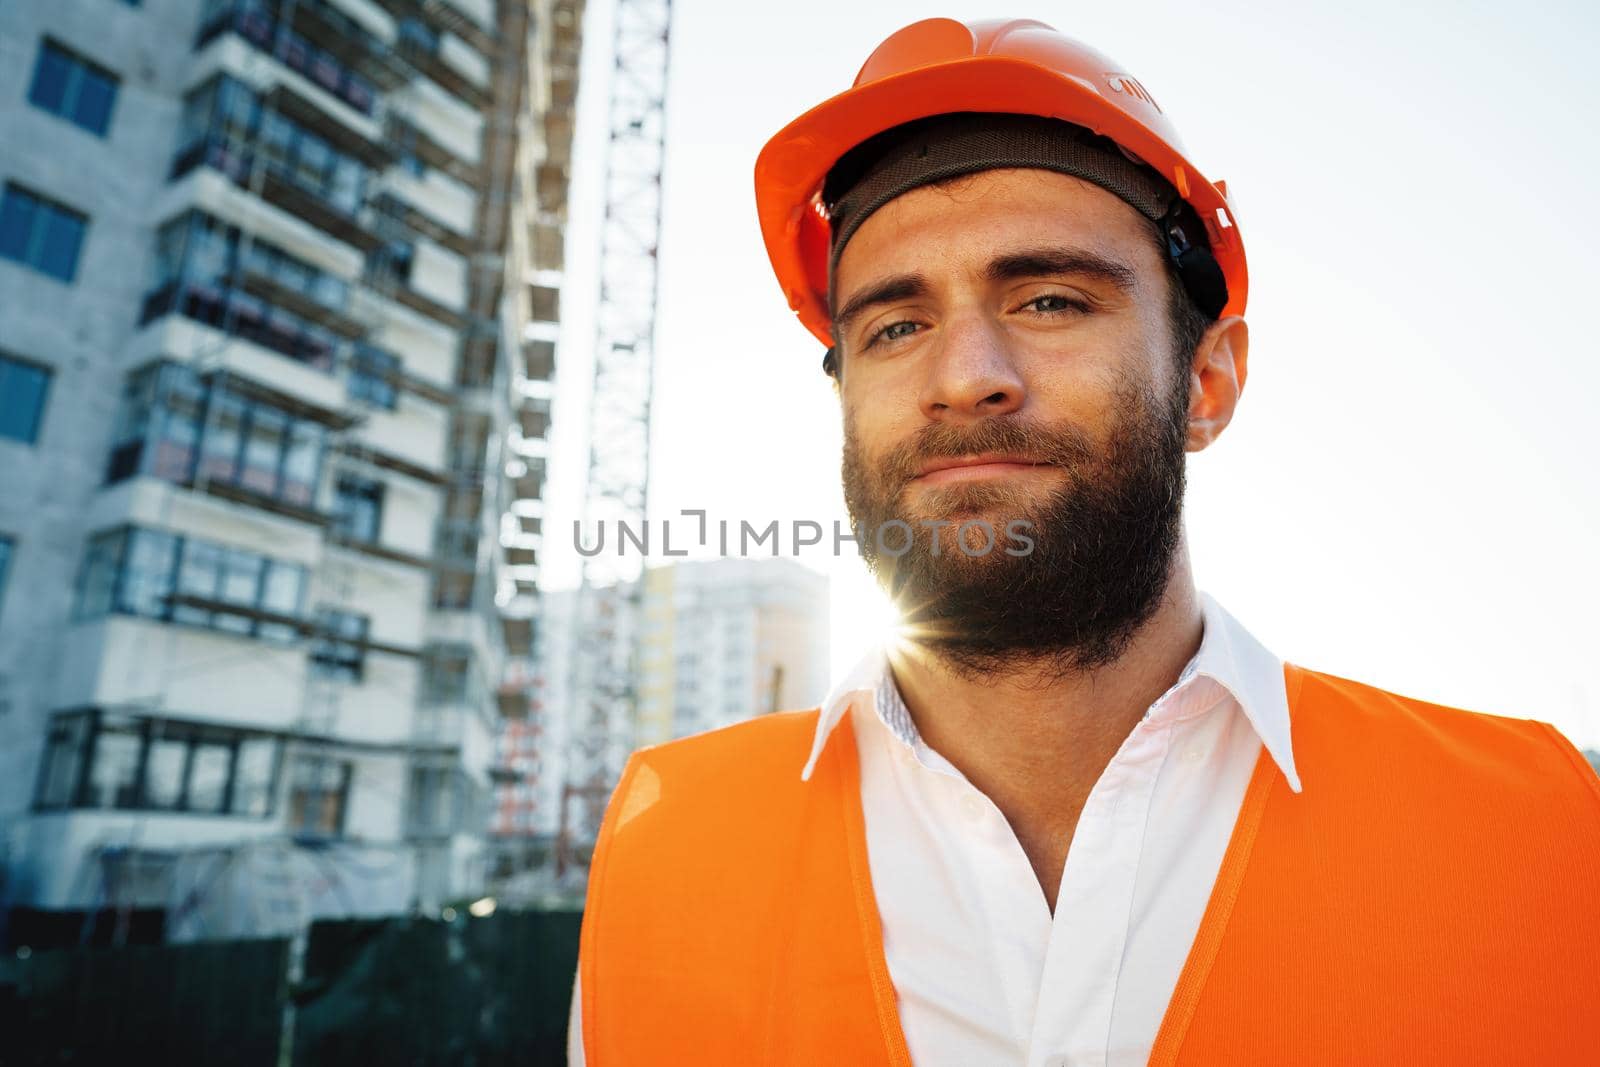 Builder wearing hardhat and safety vest standing on a commercial construction site, close up portrait